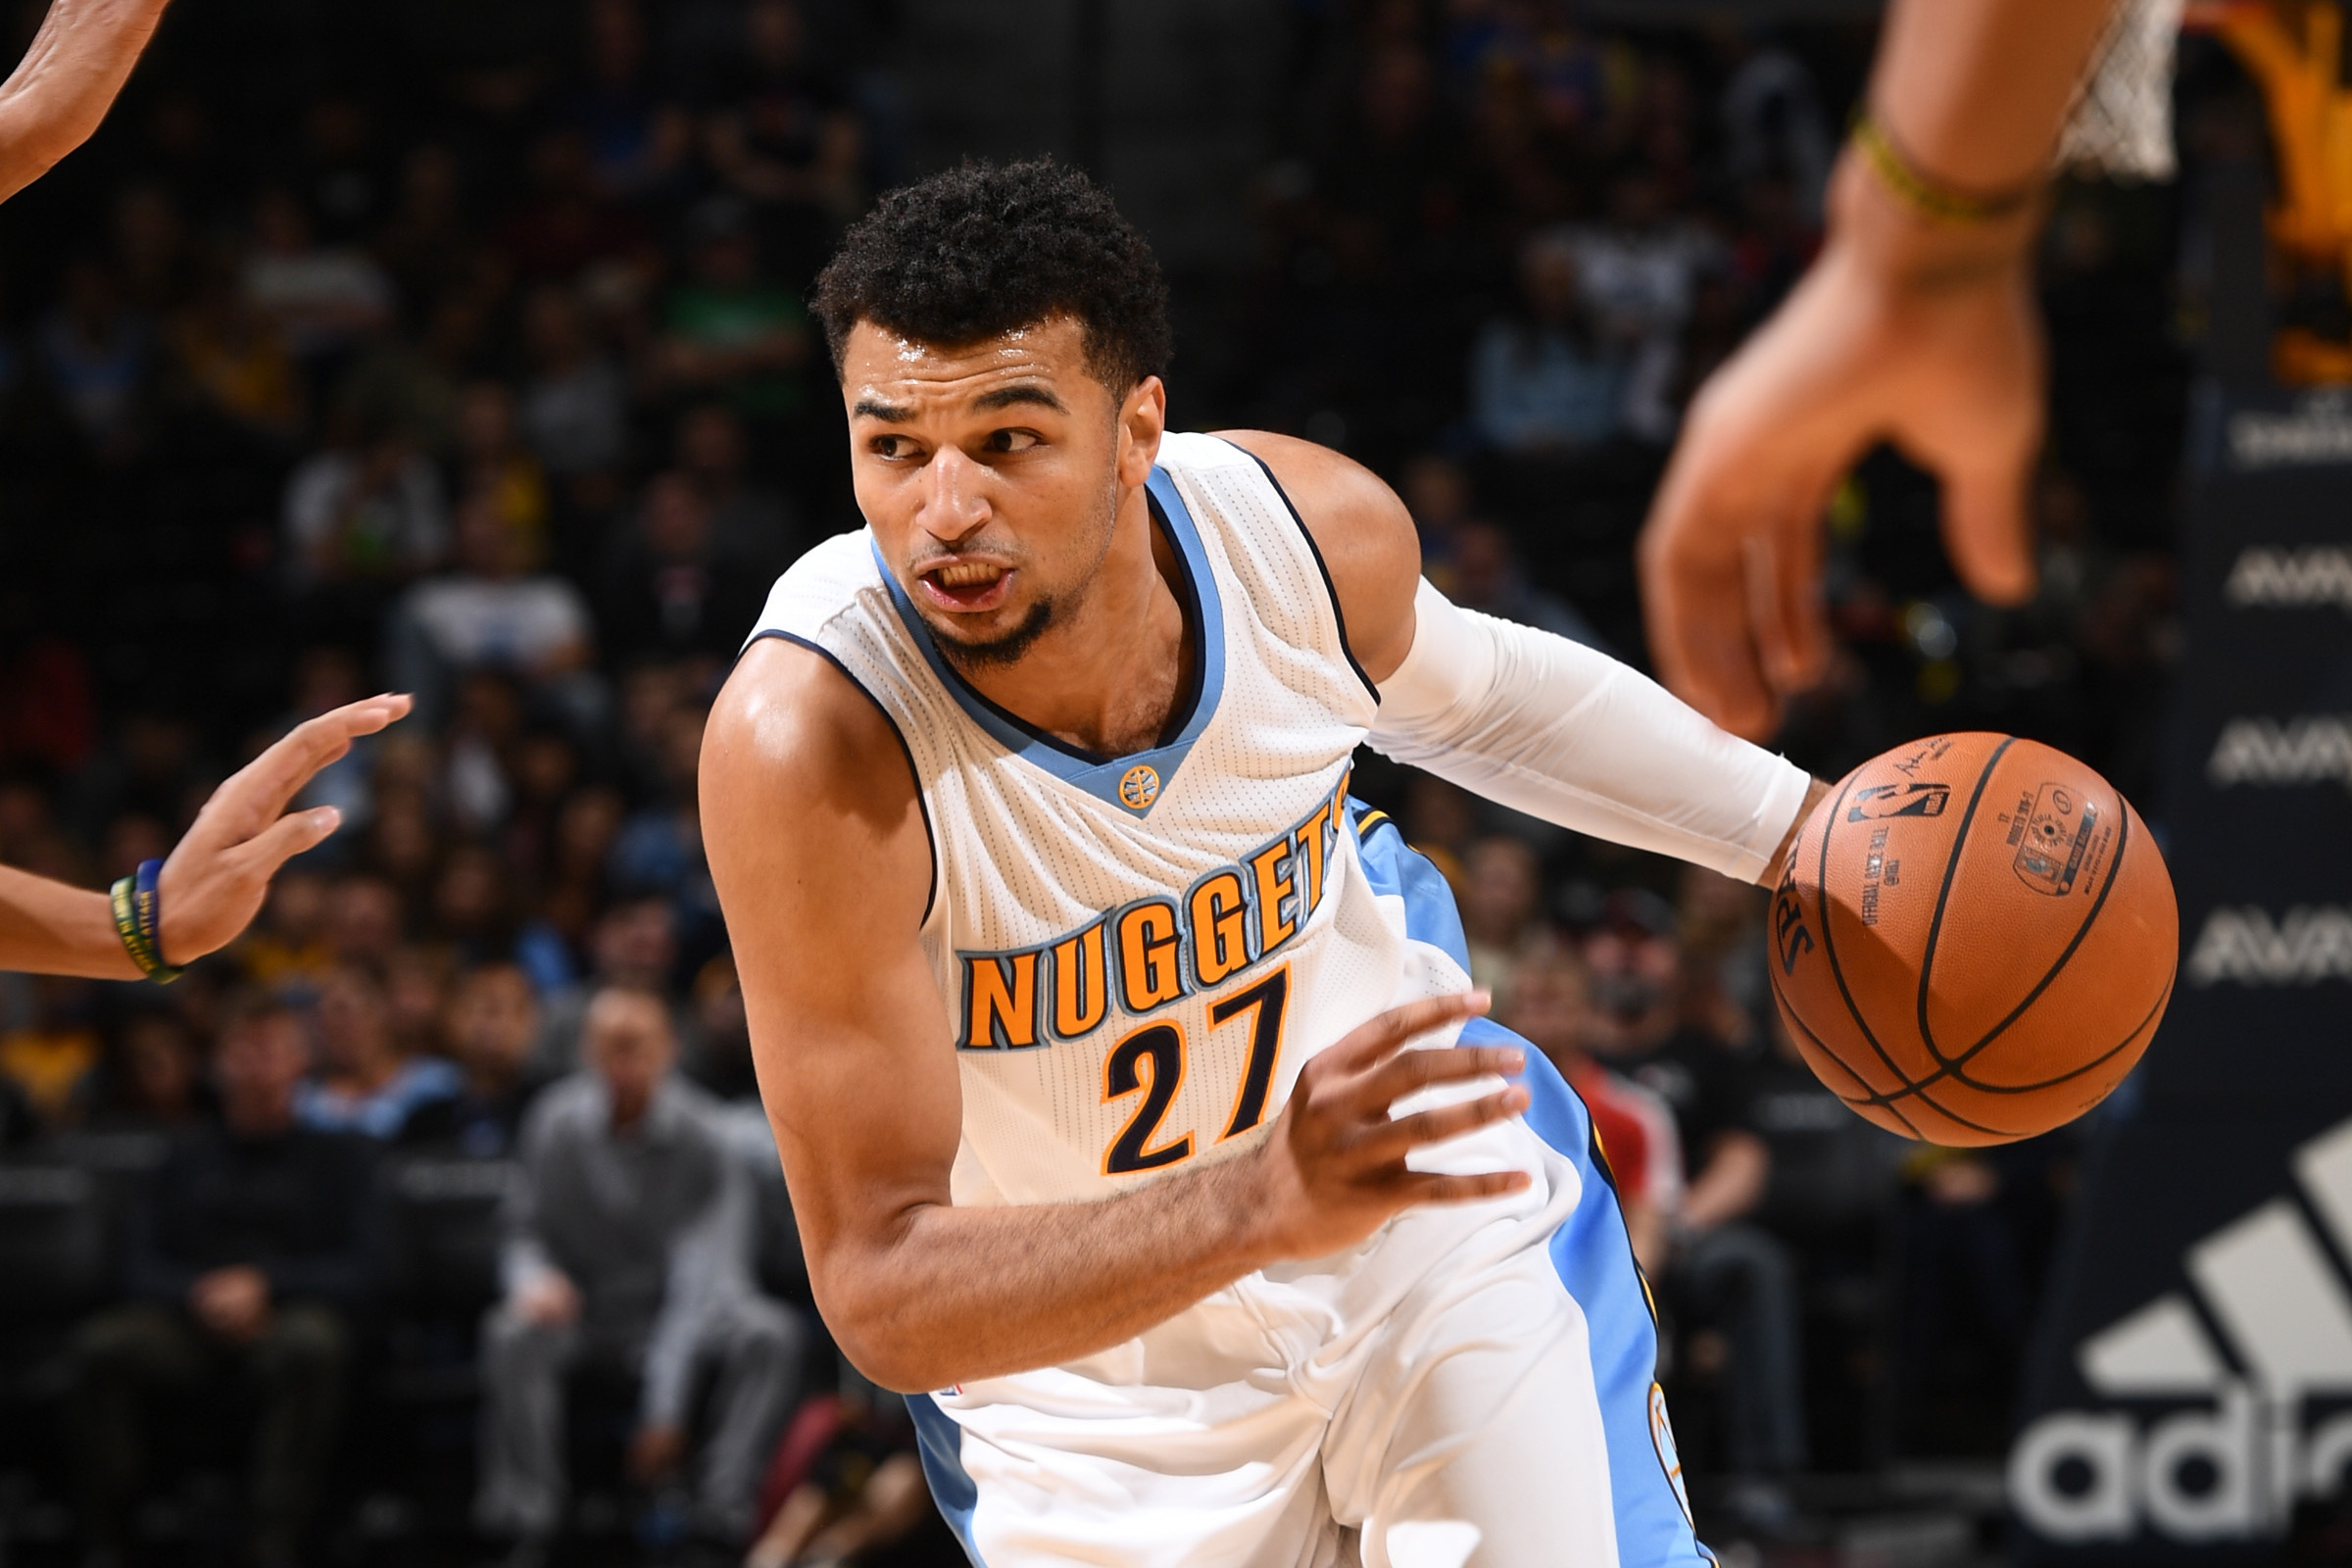 Season in review: Jamal Murray emerged as Denver's second star